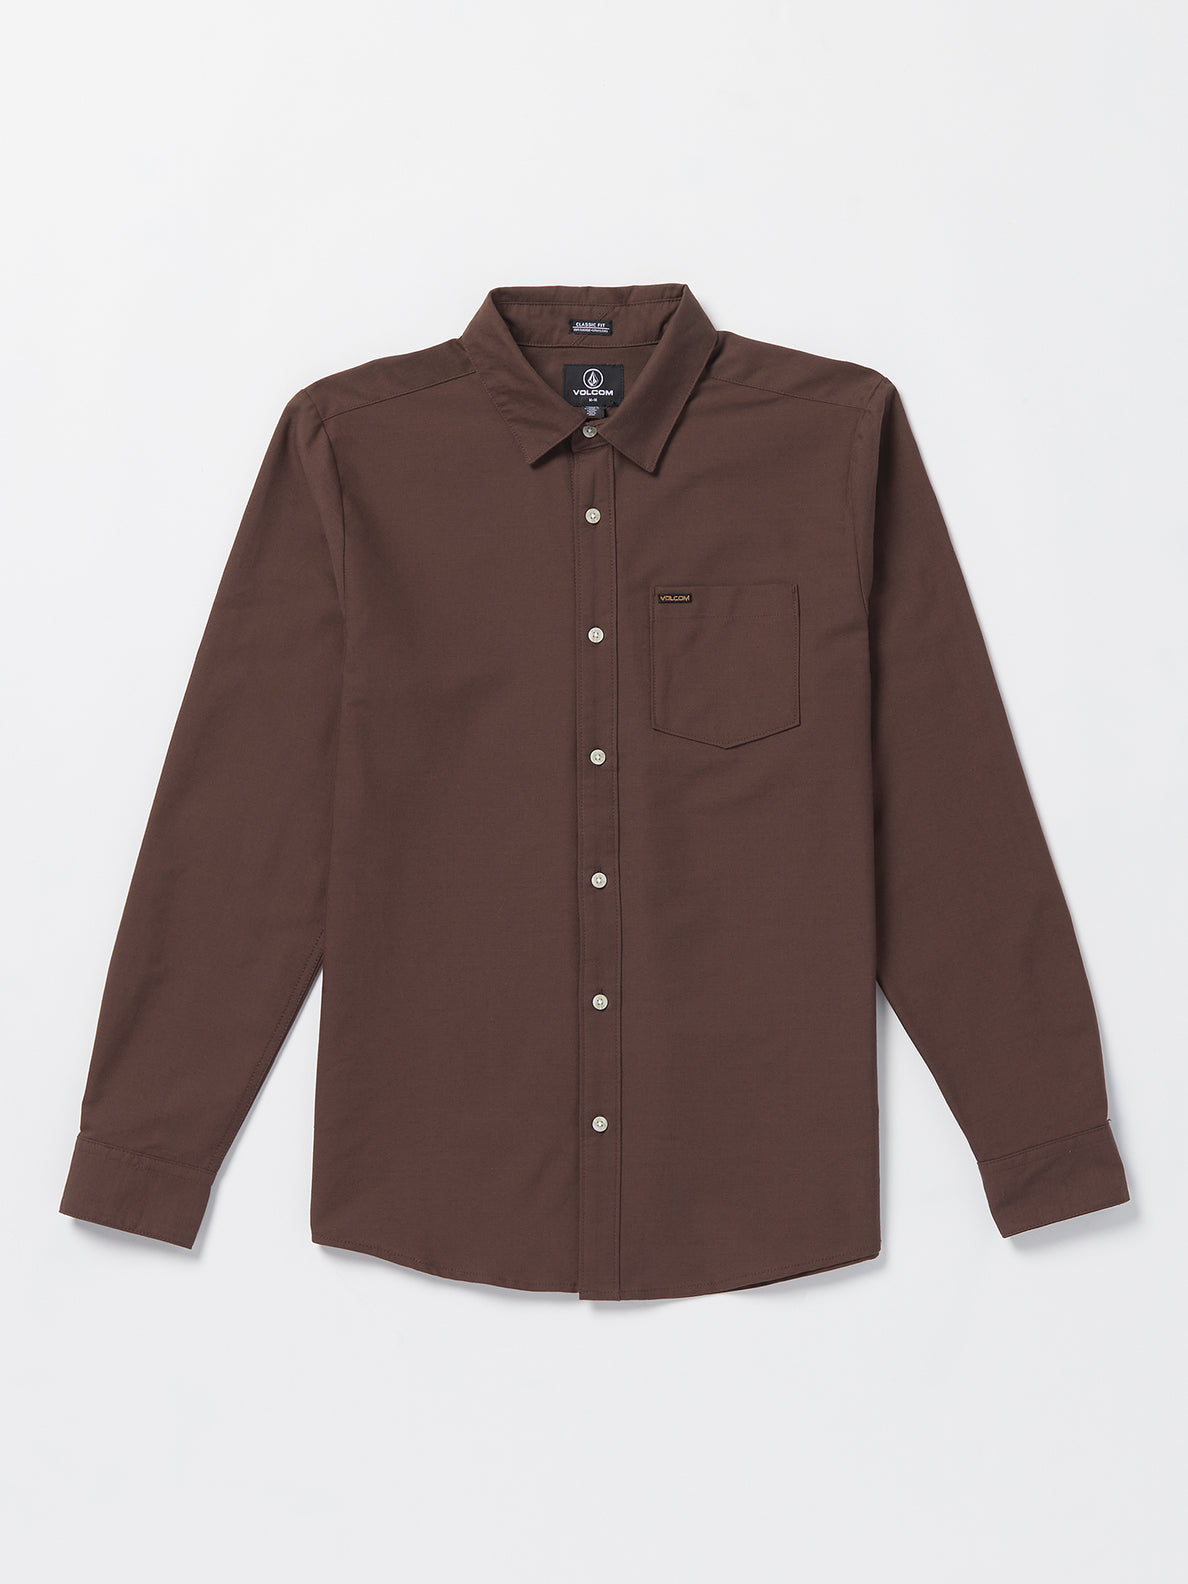 Veeco Oxford Long Sleeve Shirt - Pumice (A0532310_PMC) [F]